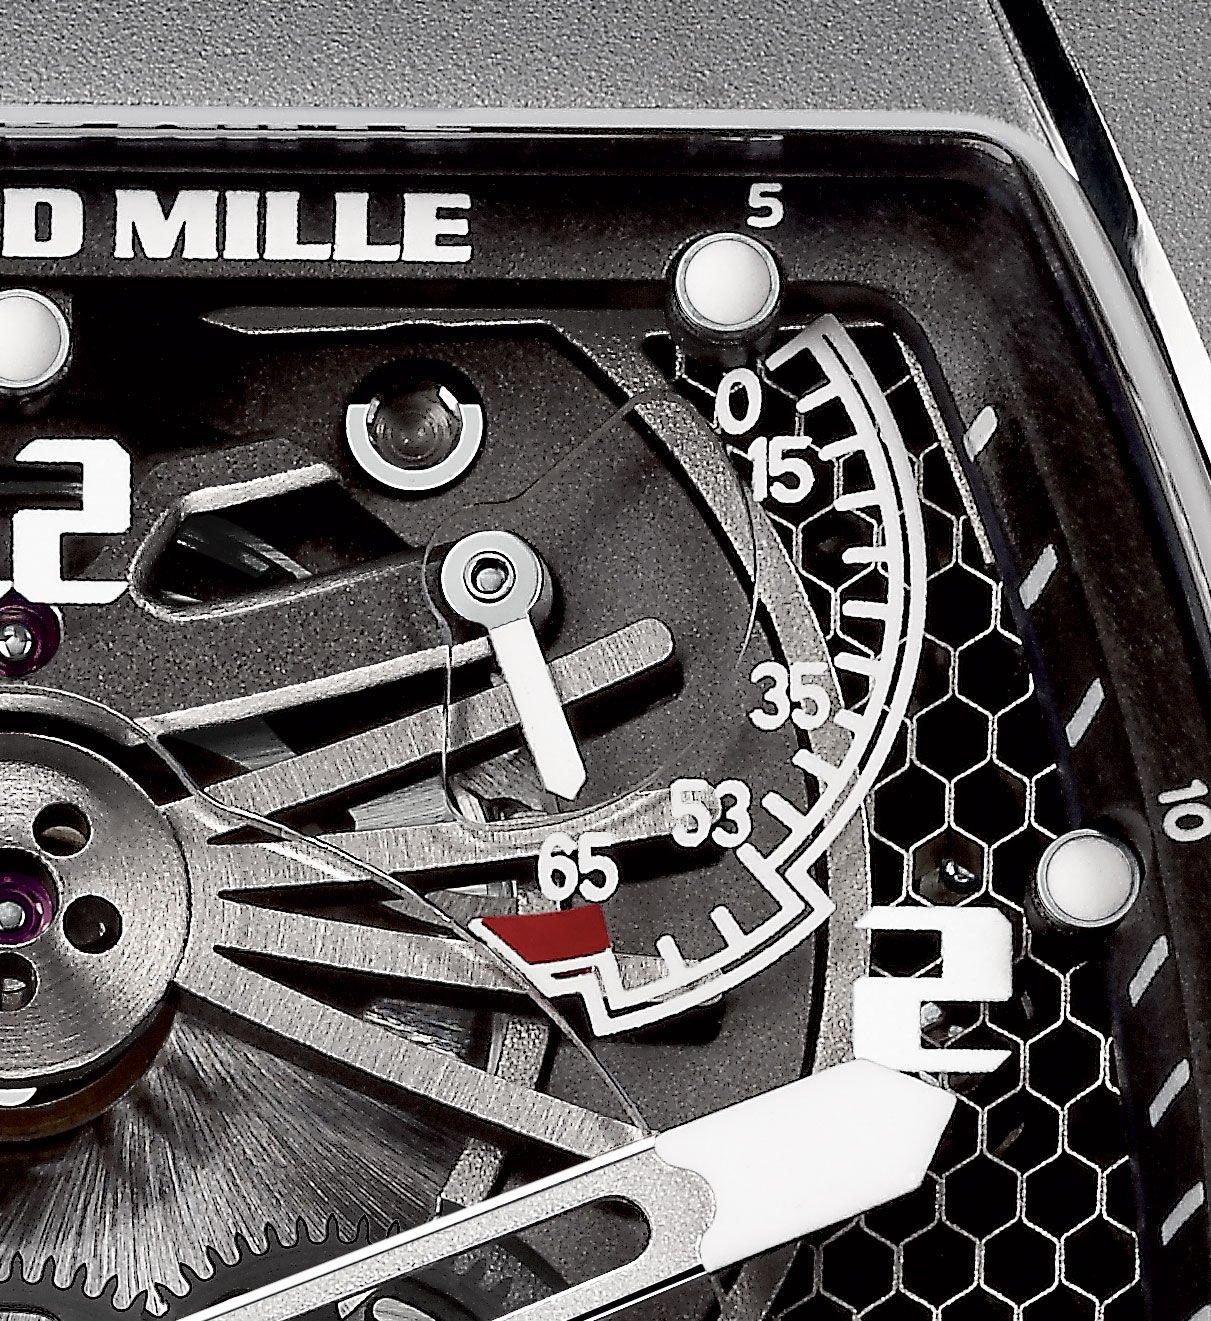 Richard Mille RM030 Automatic Decracable Rotor RM030 RG